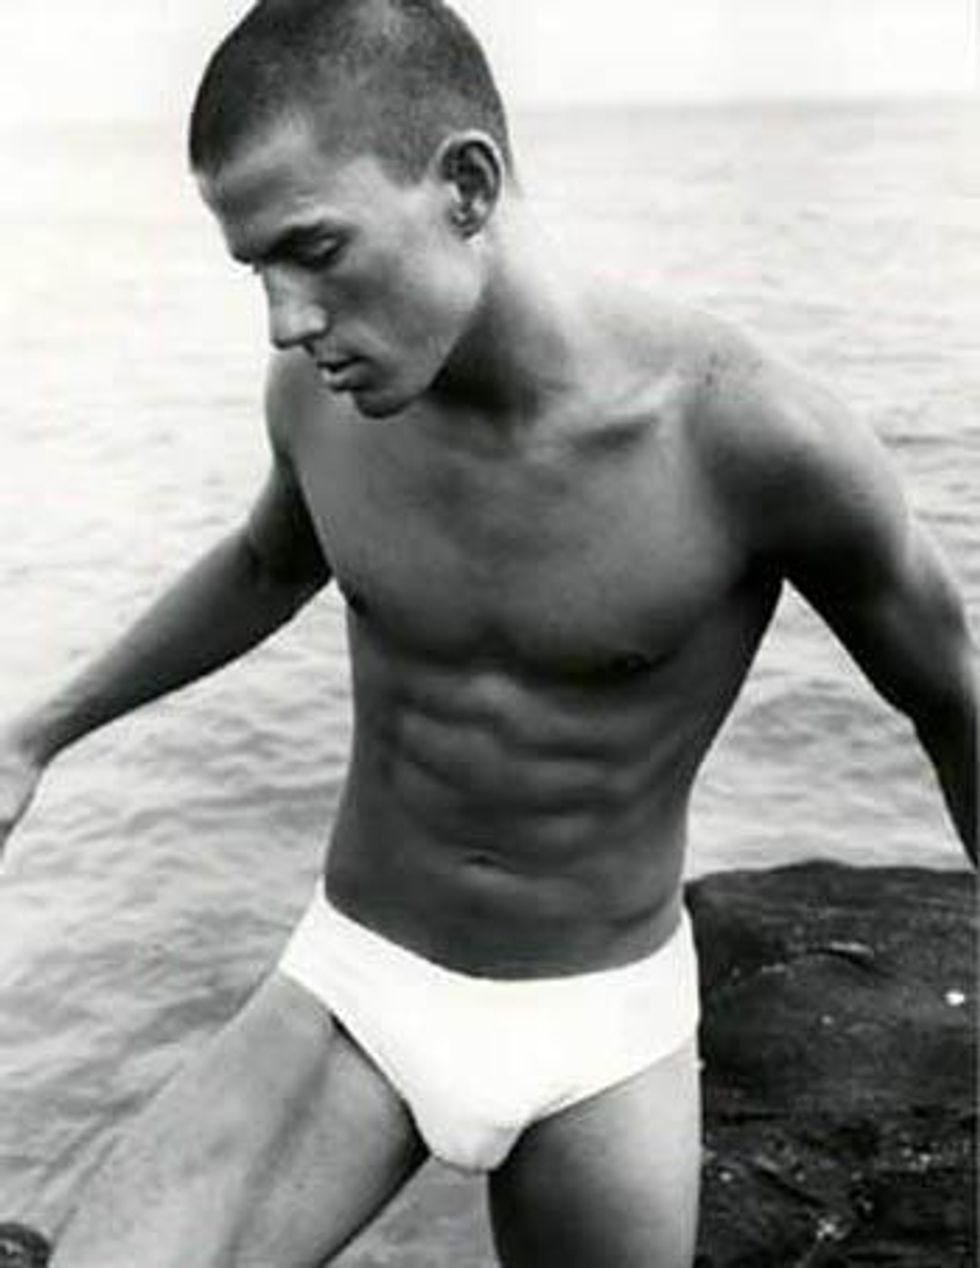 Channing Tatum for Abercrombie & Fitch, 2001